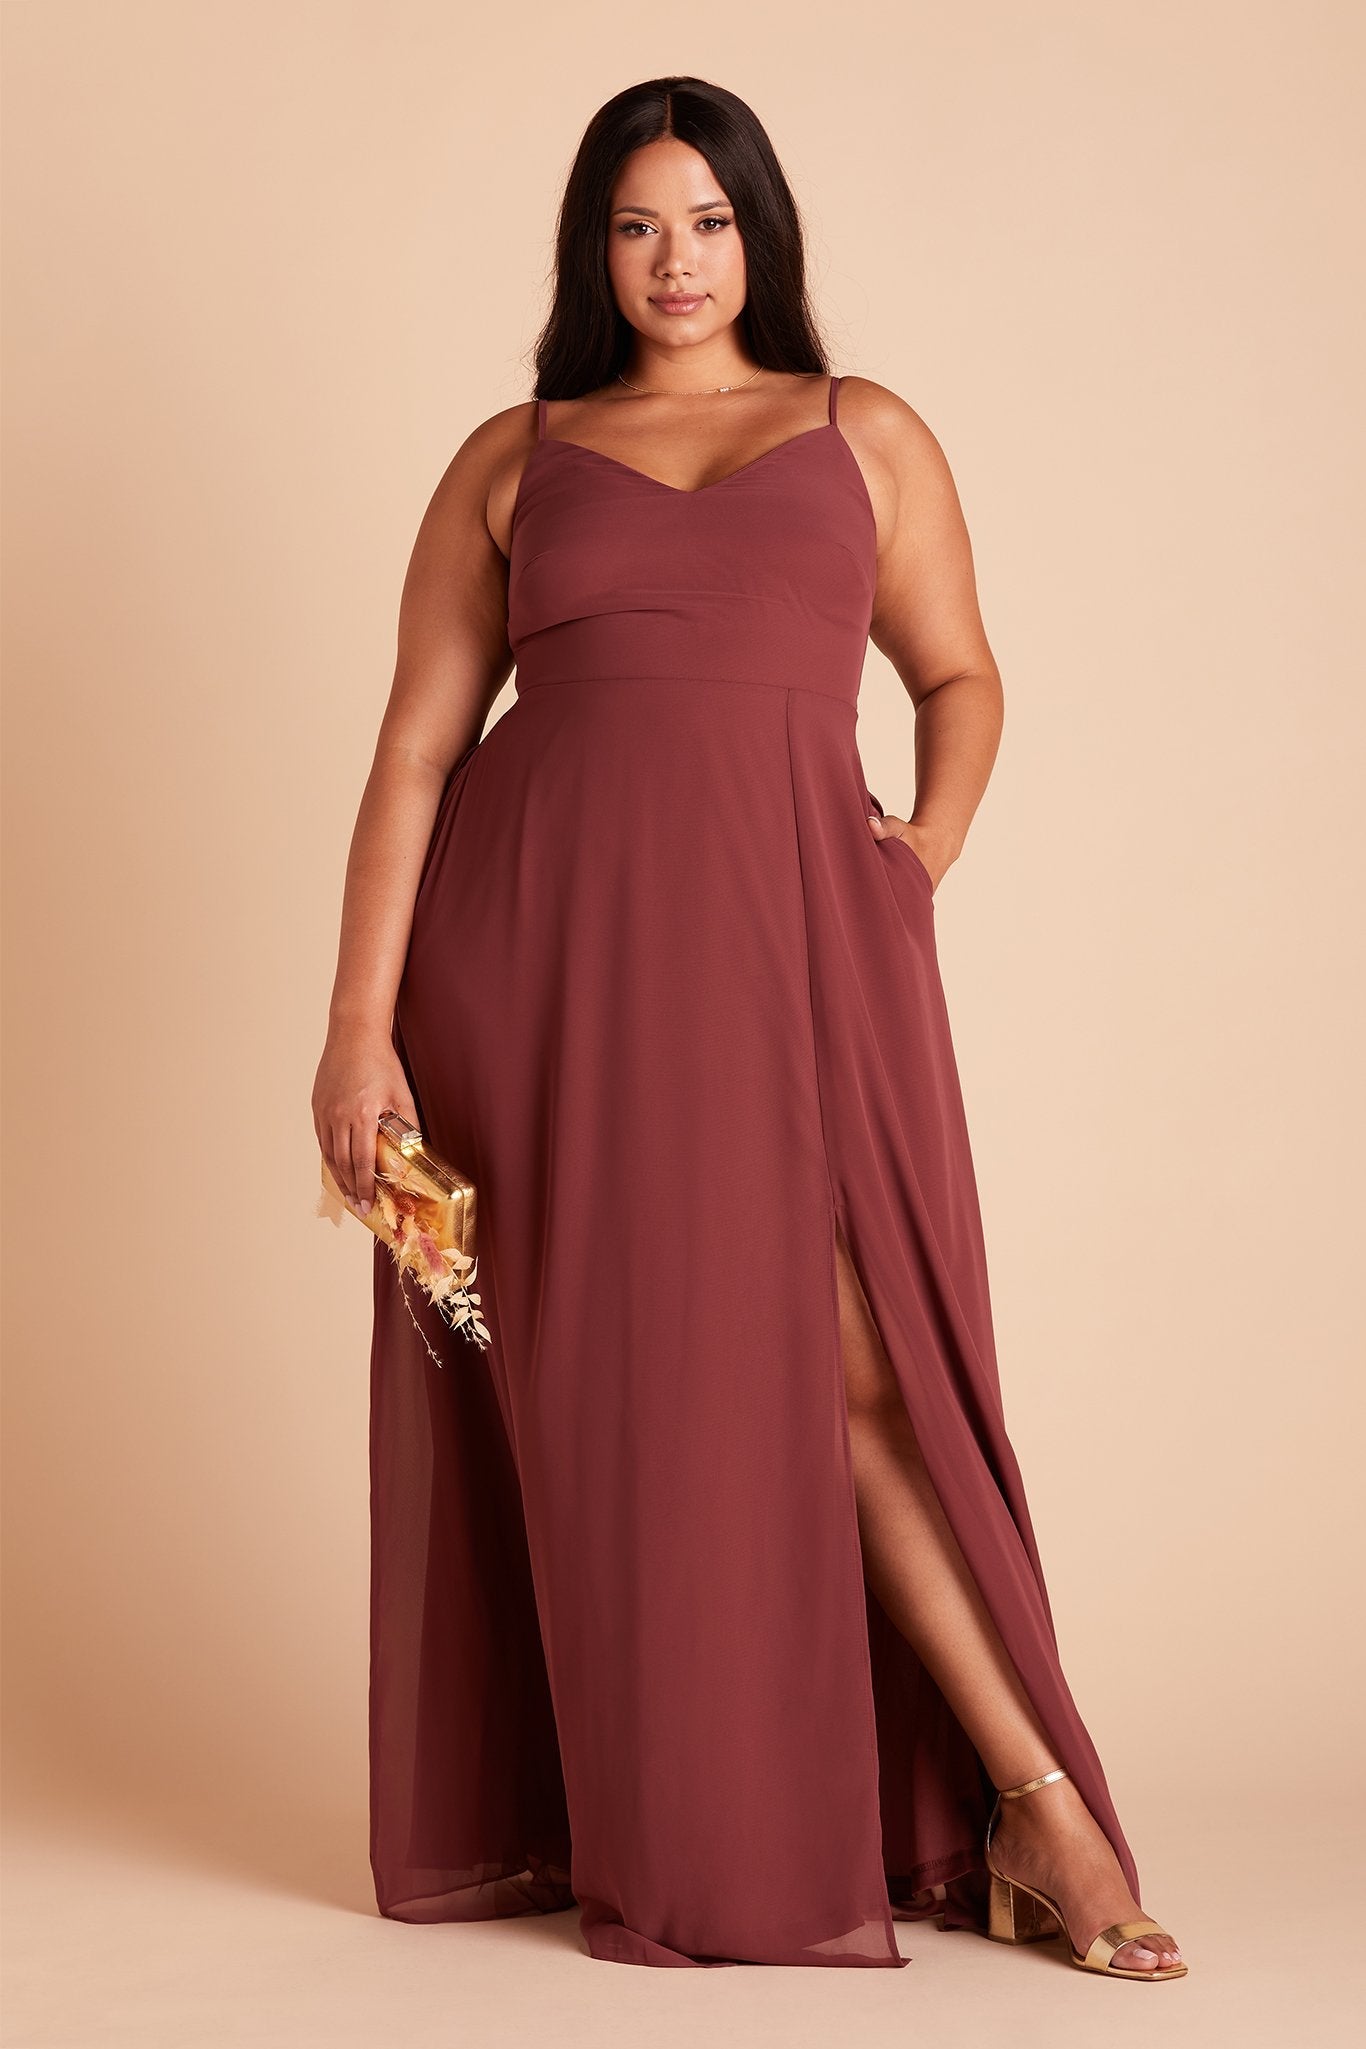 Devin convertible plus size bridesmaids dress with slit in rosewood chiffon by Birdy Grey, front view with hand in pocket